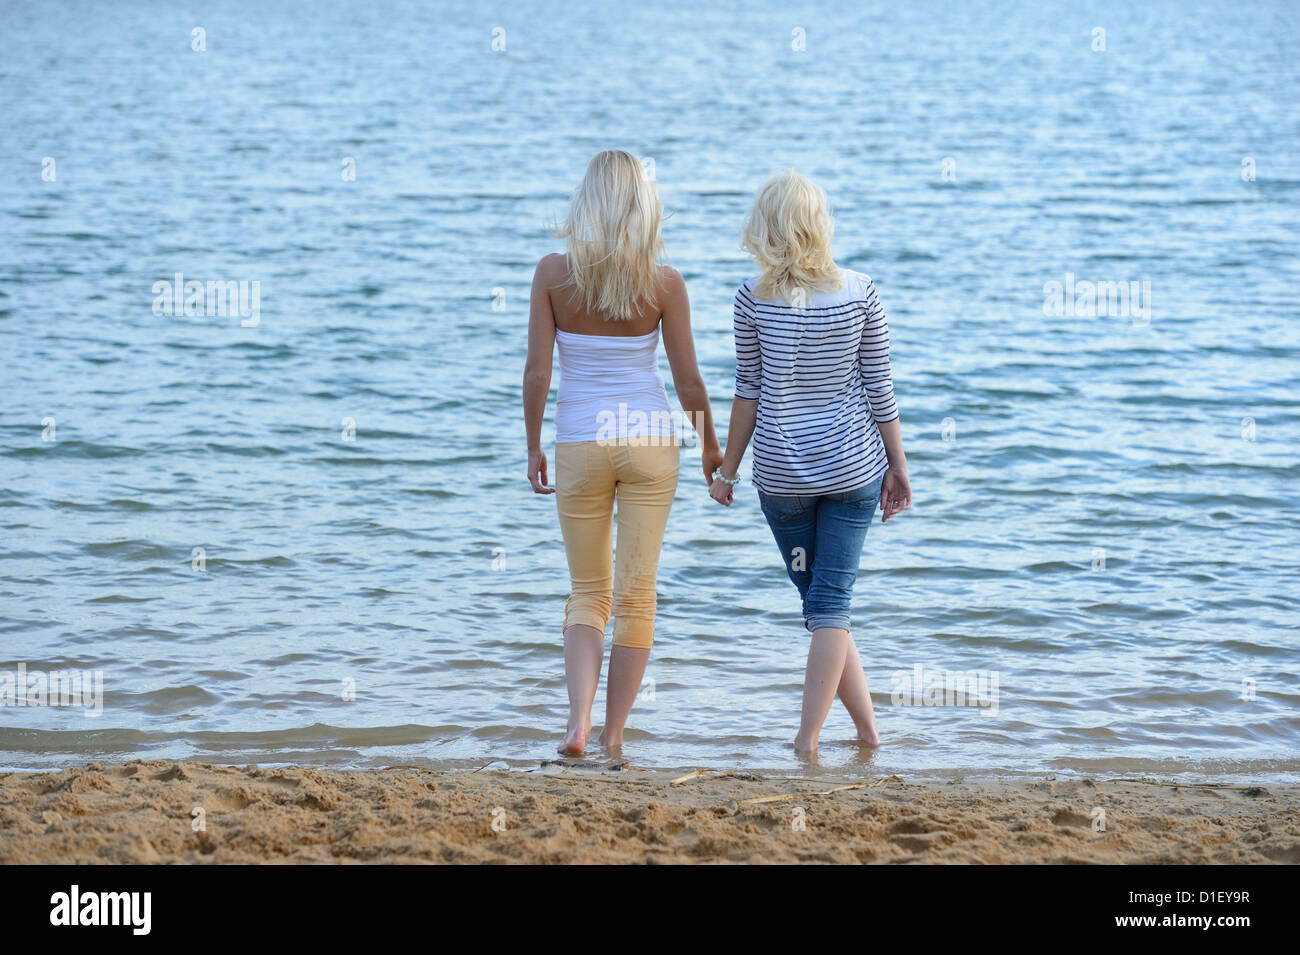 Two young blond women standing hand in hand at bathing lake Stock Photo